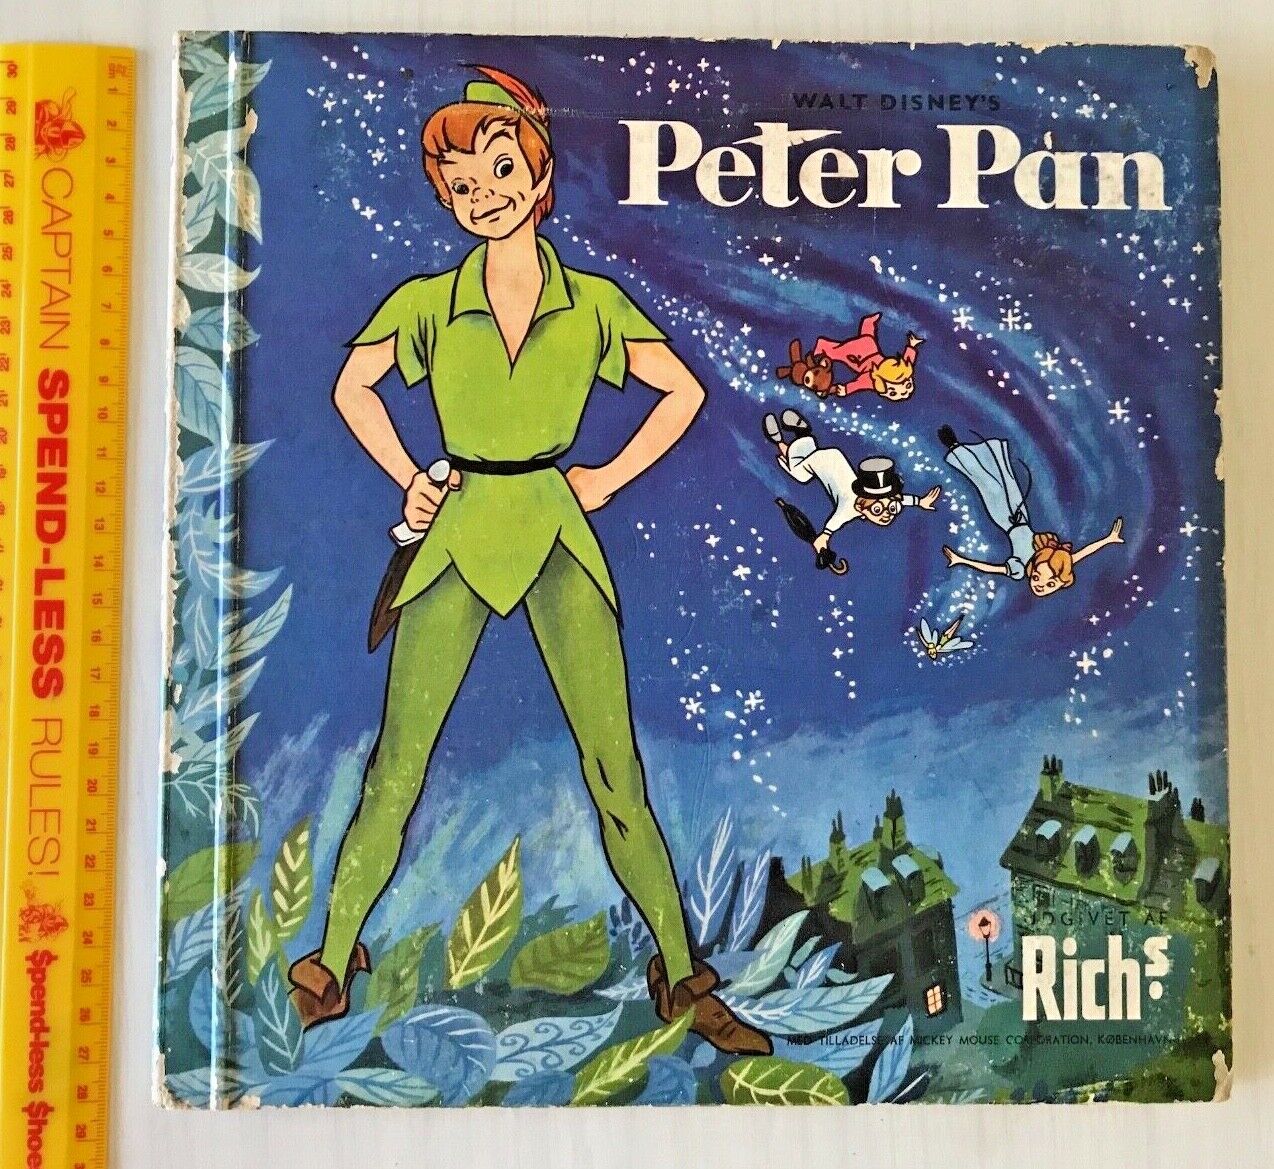 VINTAGE 1950s DISNEY\'S PETER PAN RICH\'S COFFEE DUTCH TRADING CARD BOOK COMPLETE